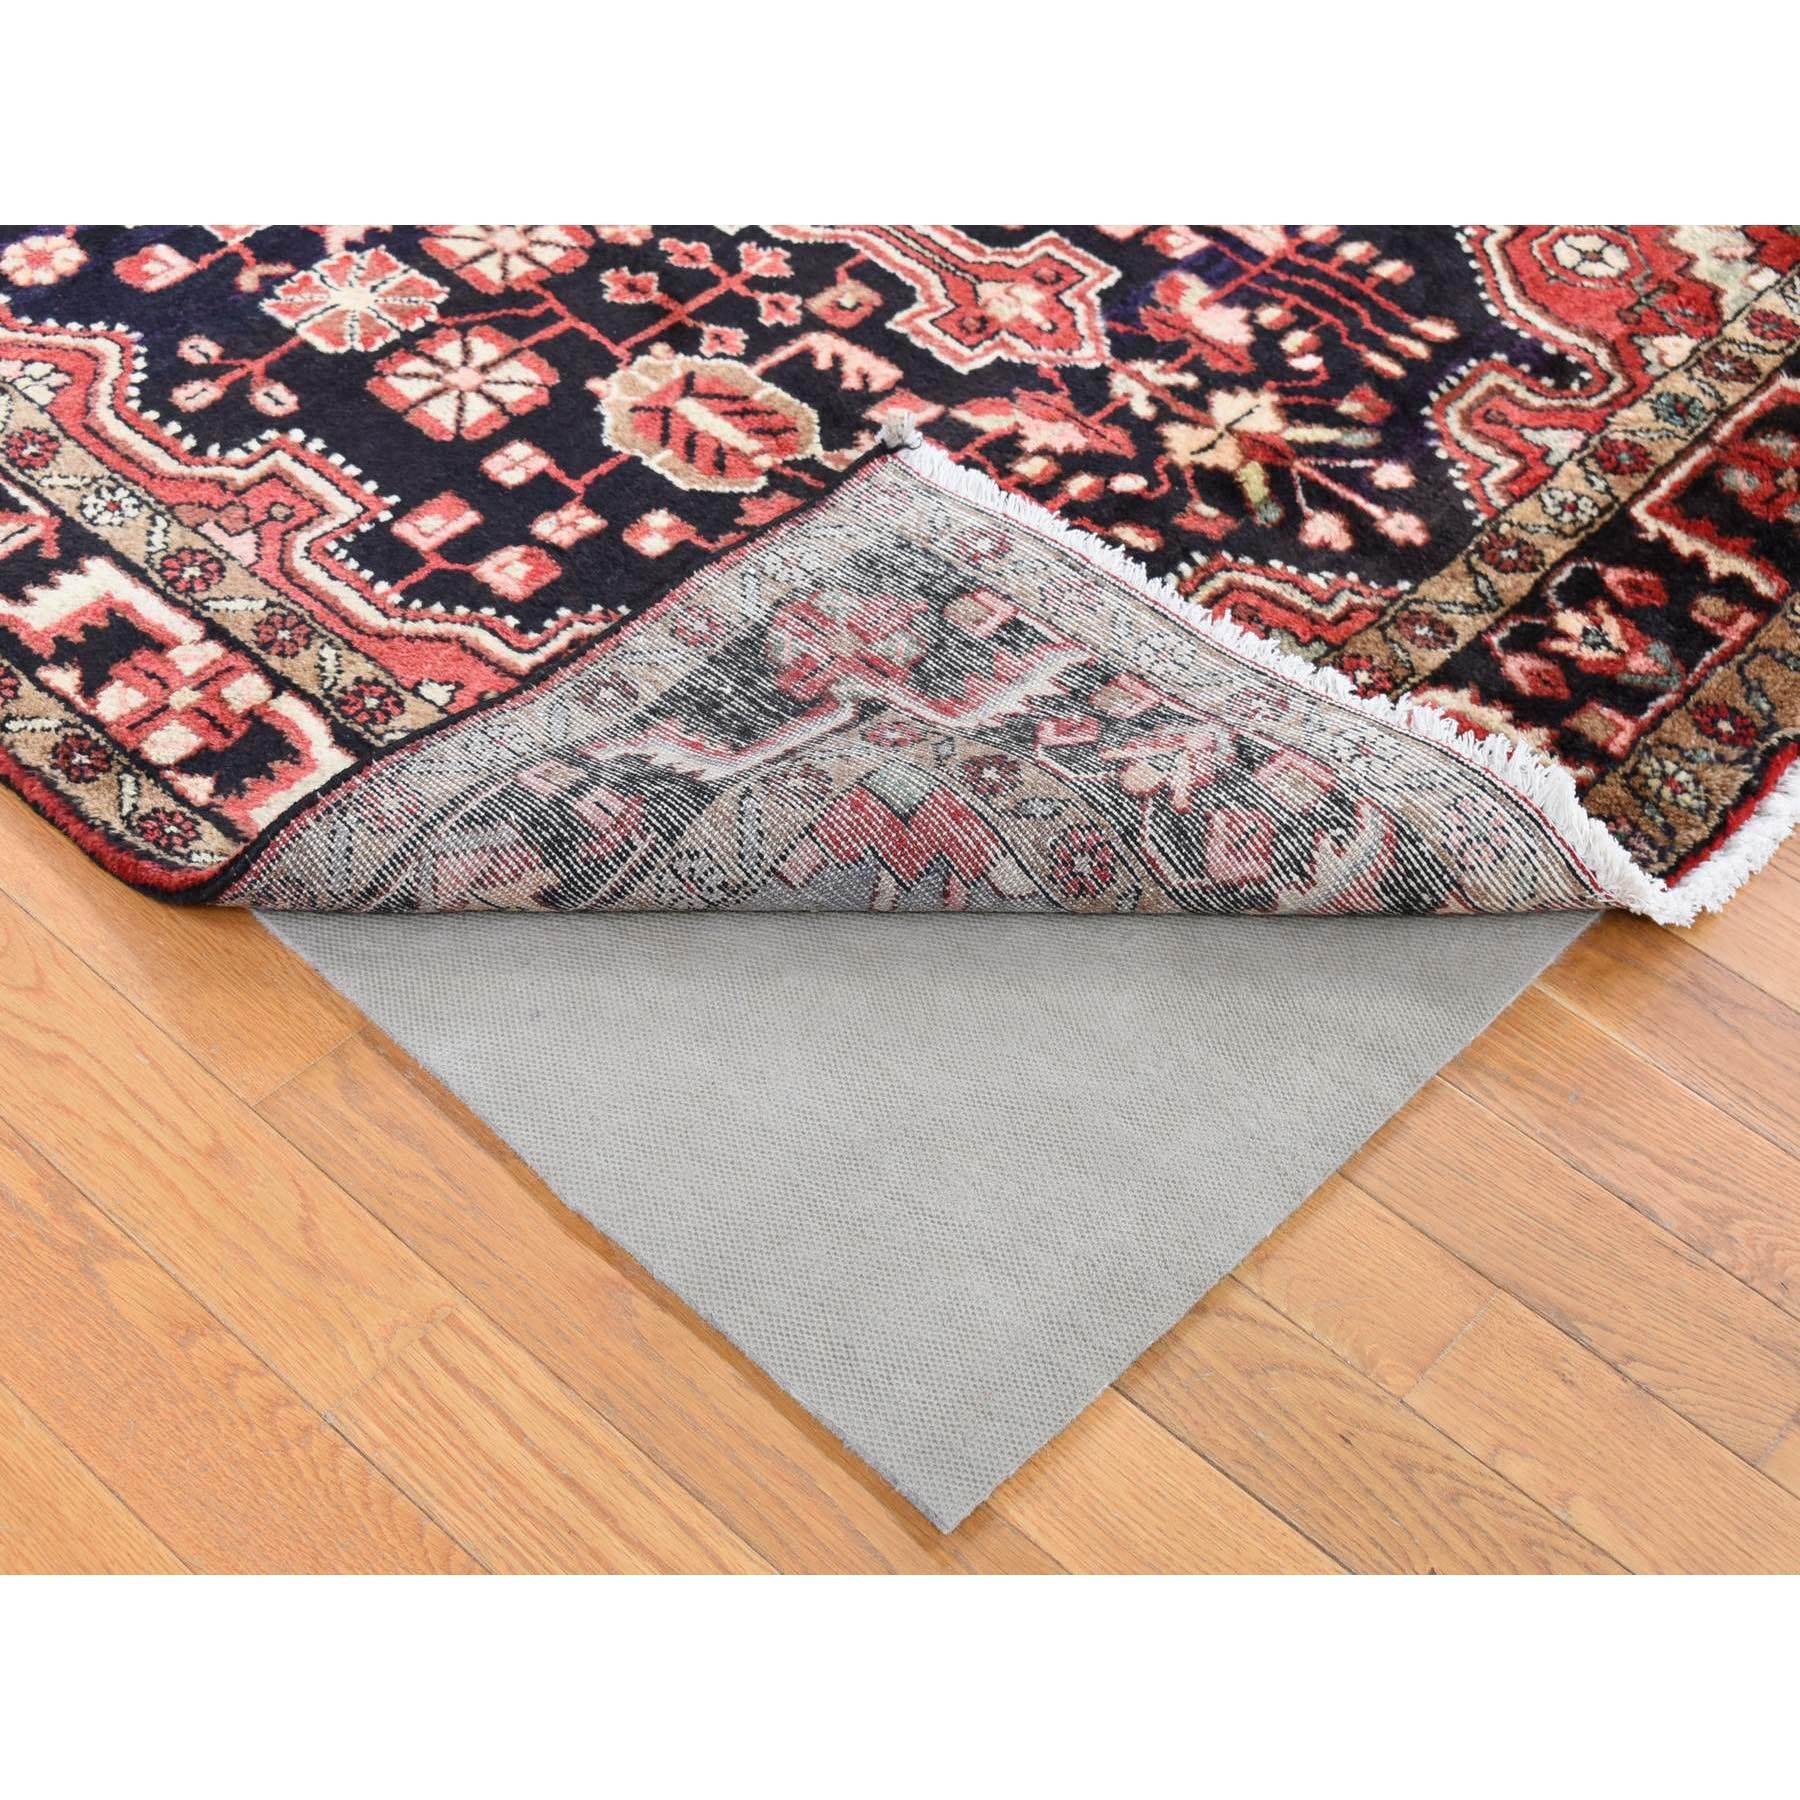 This fabulous Hand-Knotted carpet has been created and designed for extra strength and durability. This rug has been handcrafted for weeks in the traditional method that is used to make
Exact Rug Size in Feet and Inches : 4'6